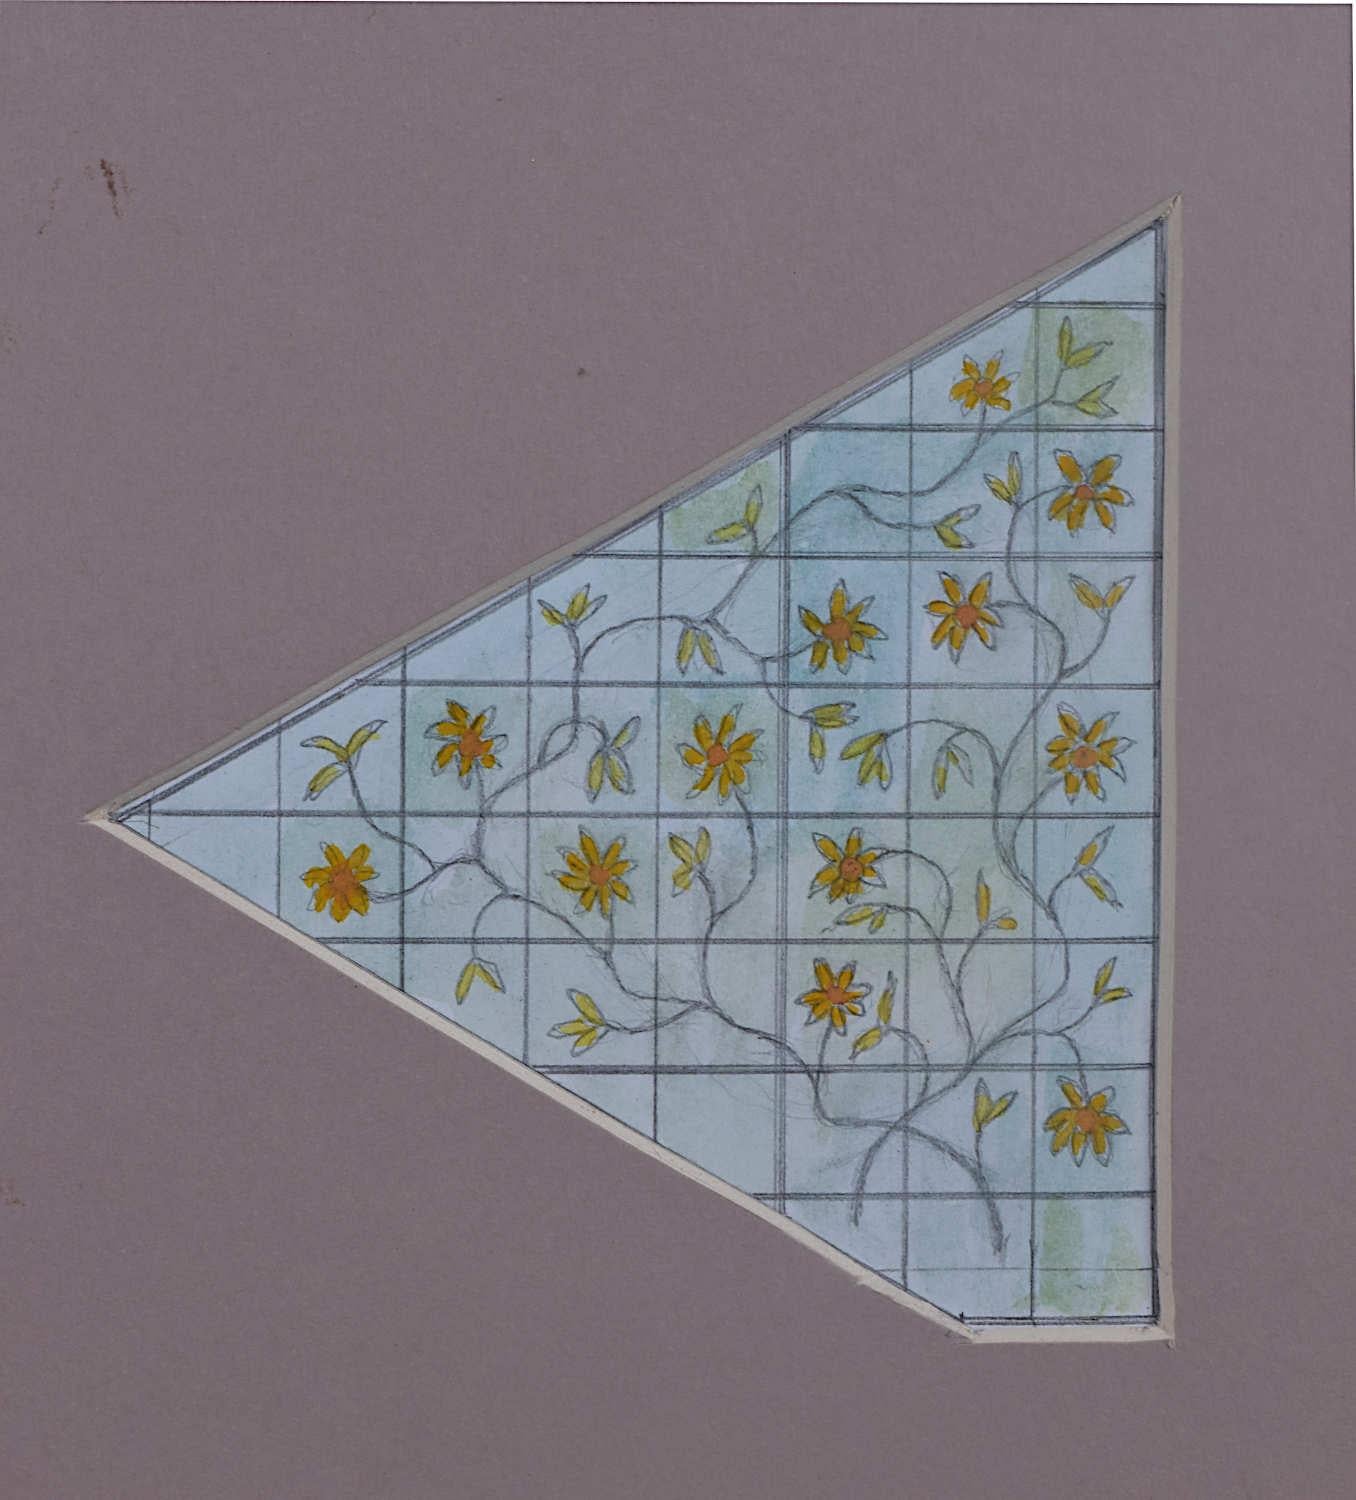 We acquired a series of watercolour stained glass designs from Jane Gray's studio. To find more scroll down to "More from this Seller" and below it click on "See all from this seller." 

Jane Gray (b.1931)
Stained Glass Design
Watercolour
11.5 x 11